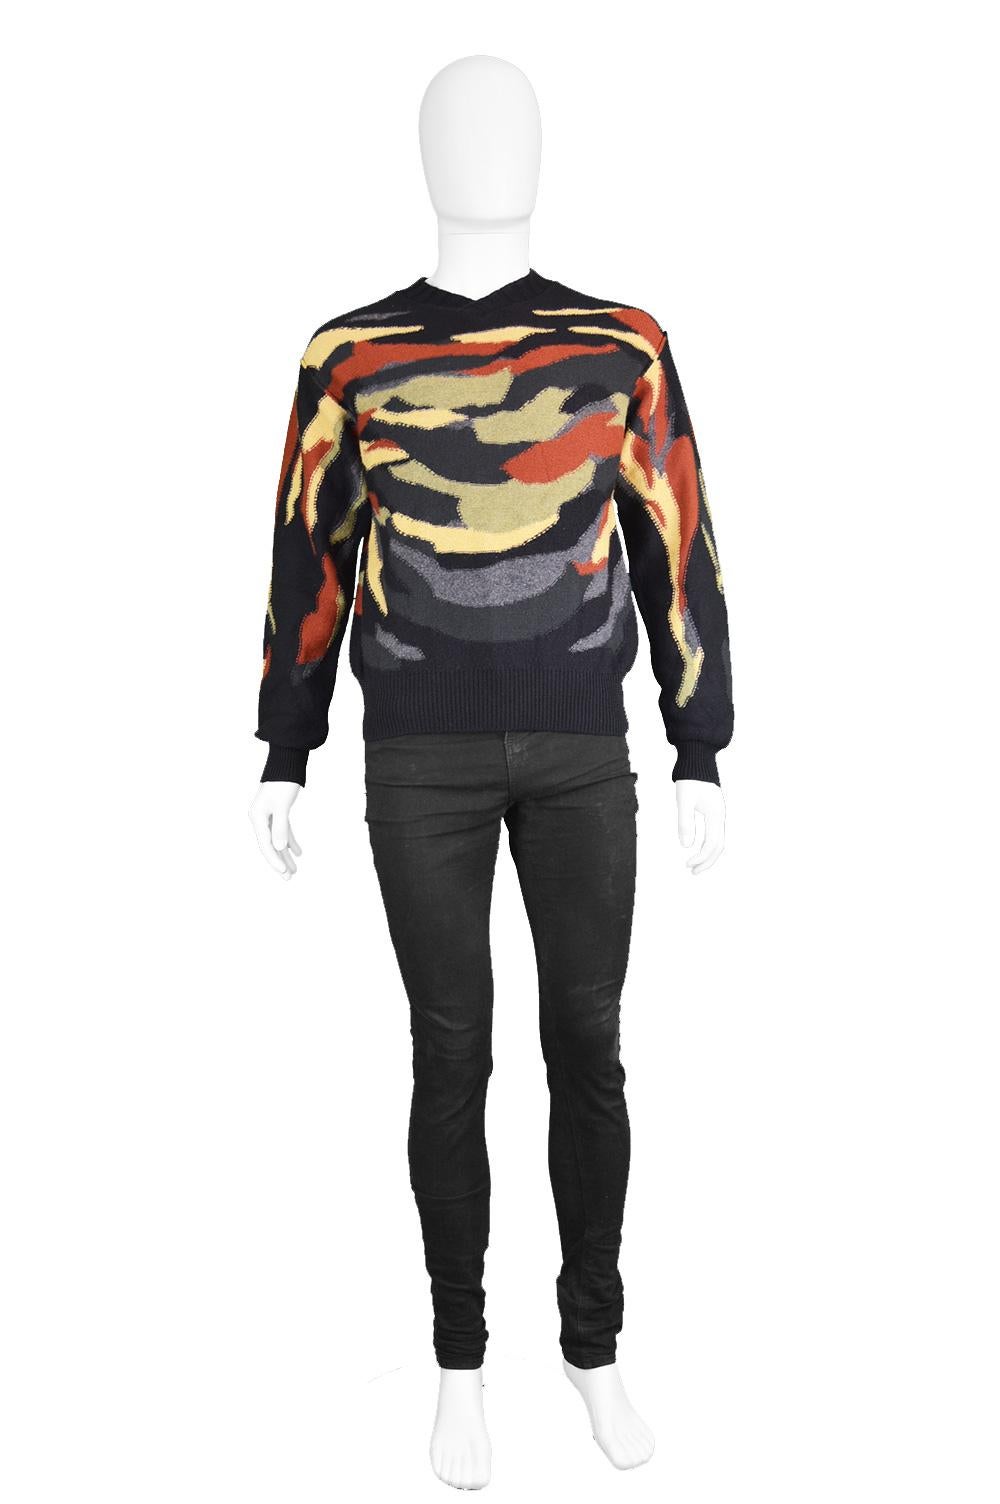 Sonia Rykiel Homme Vintage Mens Black Wool Multicoloured Abstract Jumper

Estimated Size: Men's S-M. Click 'Continue Reading' to check measurements and description.  
Chest - 42” / 106cm (allow roughly 2-4